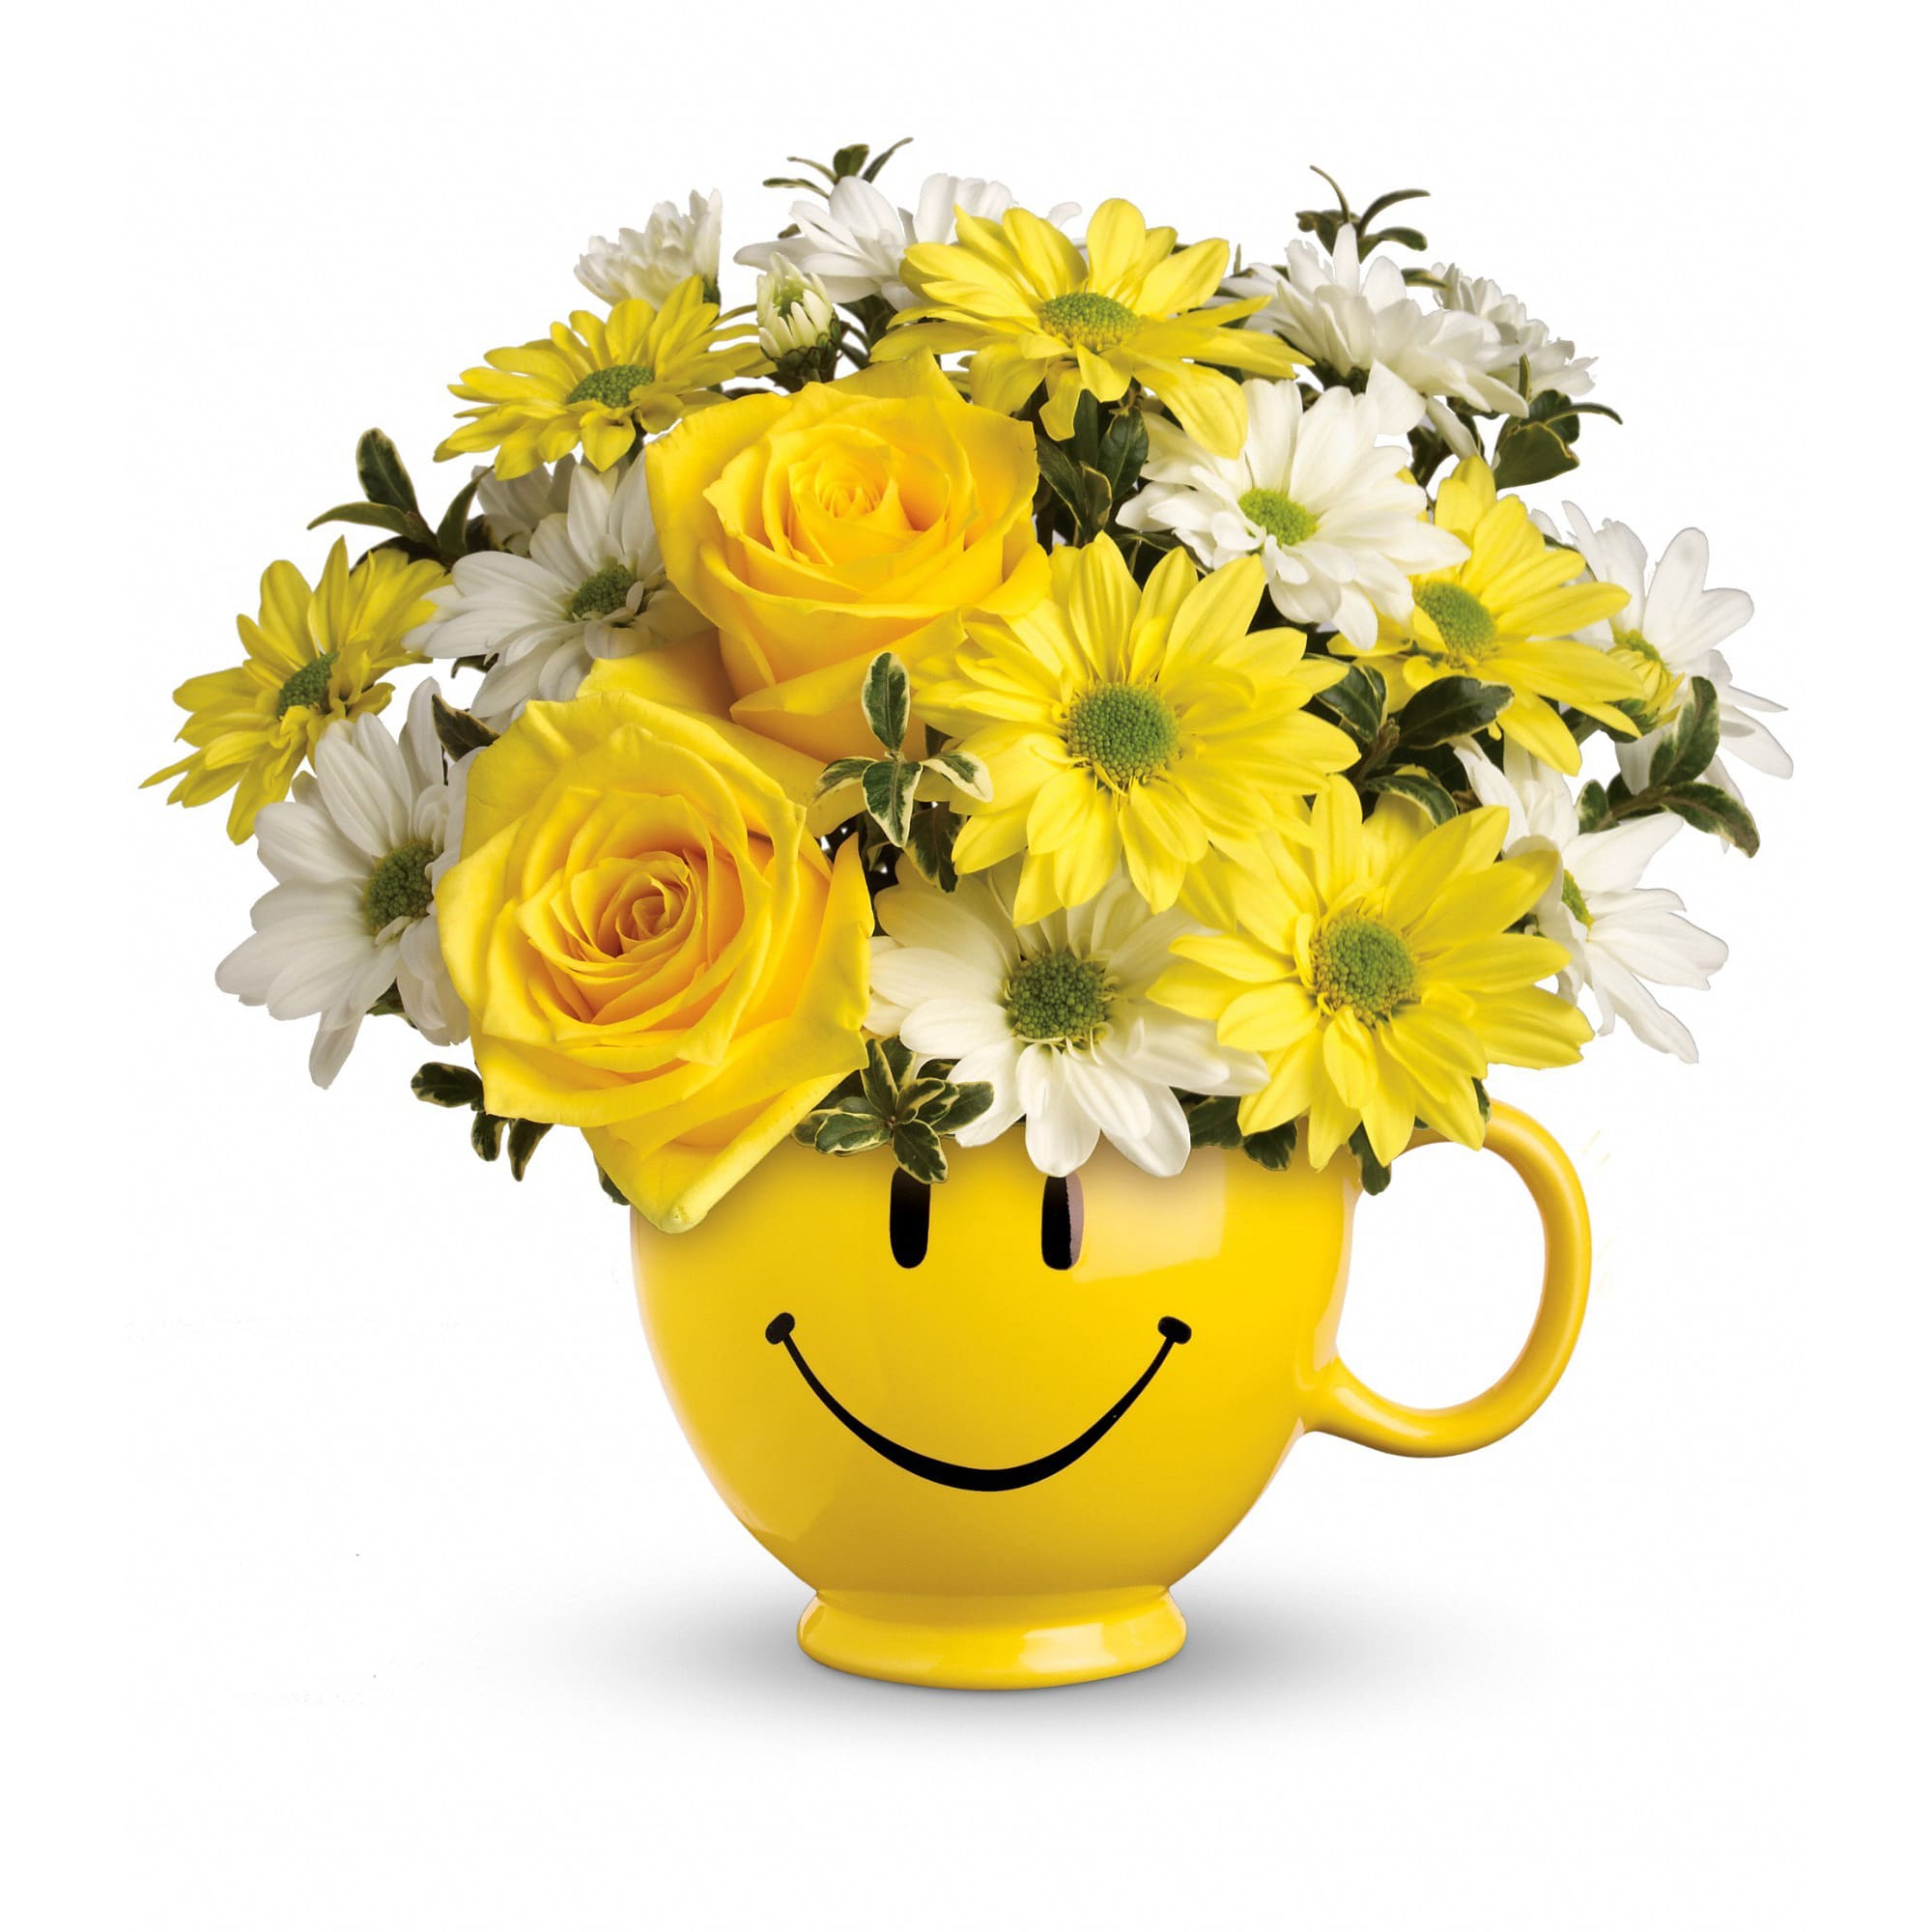 ENCINITAS FLORIST Be Happy Bouquet With Roses  - There are probably a million reasons this is such a popular bouquet. Of course, there are probably just as many reasons to send this cheerful arrangement. Full of happy flowers, this ceramic happy face mug will bring smiles for years to come. Especially when filled with that first cup of morning coffee or cocoa!